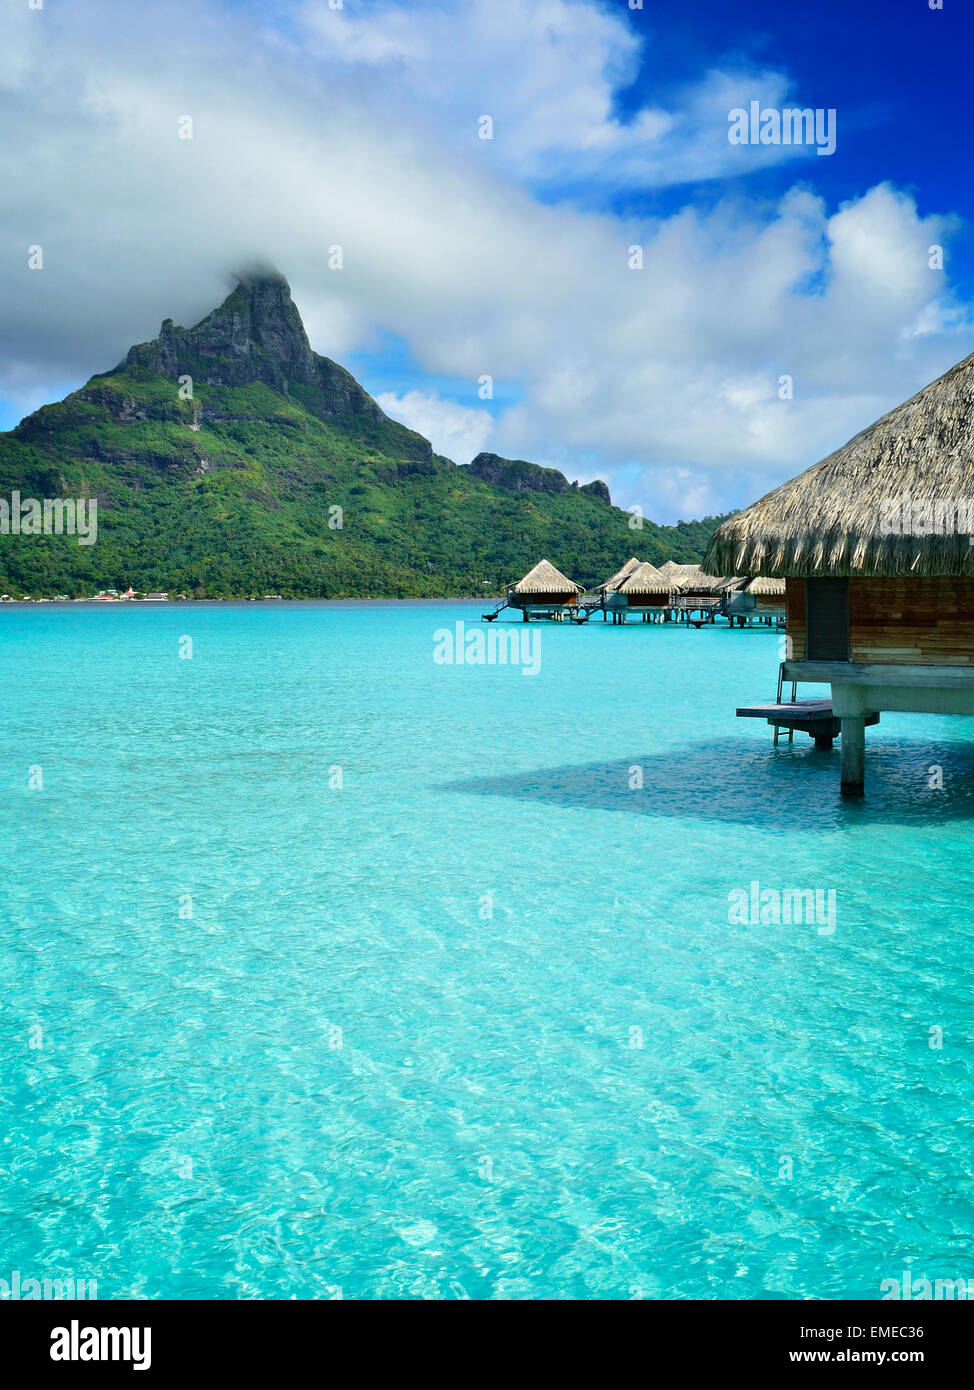 Luxury overwater honeymoon bungalows in a vacation resort in the clear blue lagoon of Bora Bora, French Polynesia Stock Photo